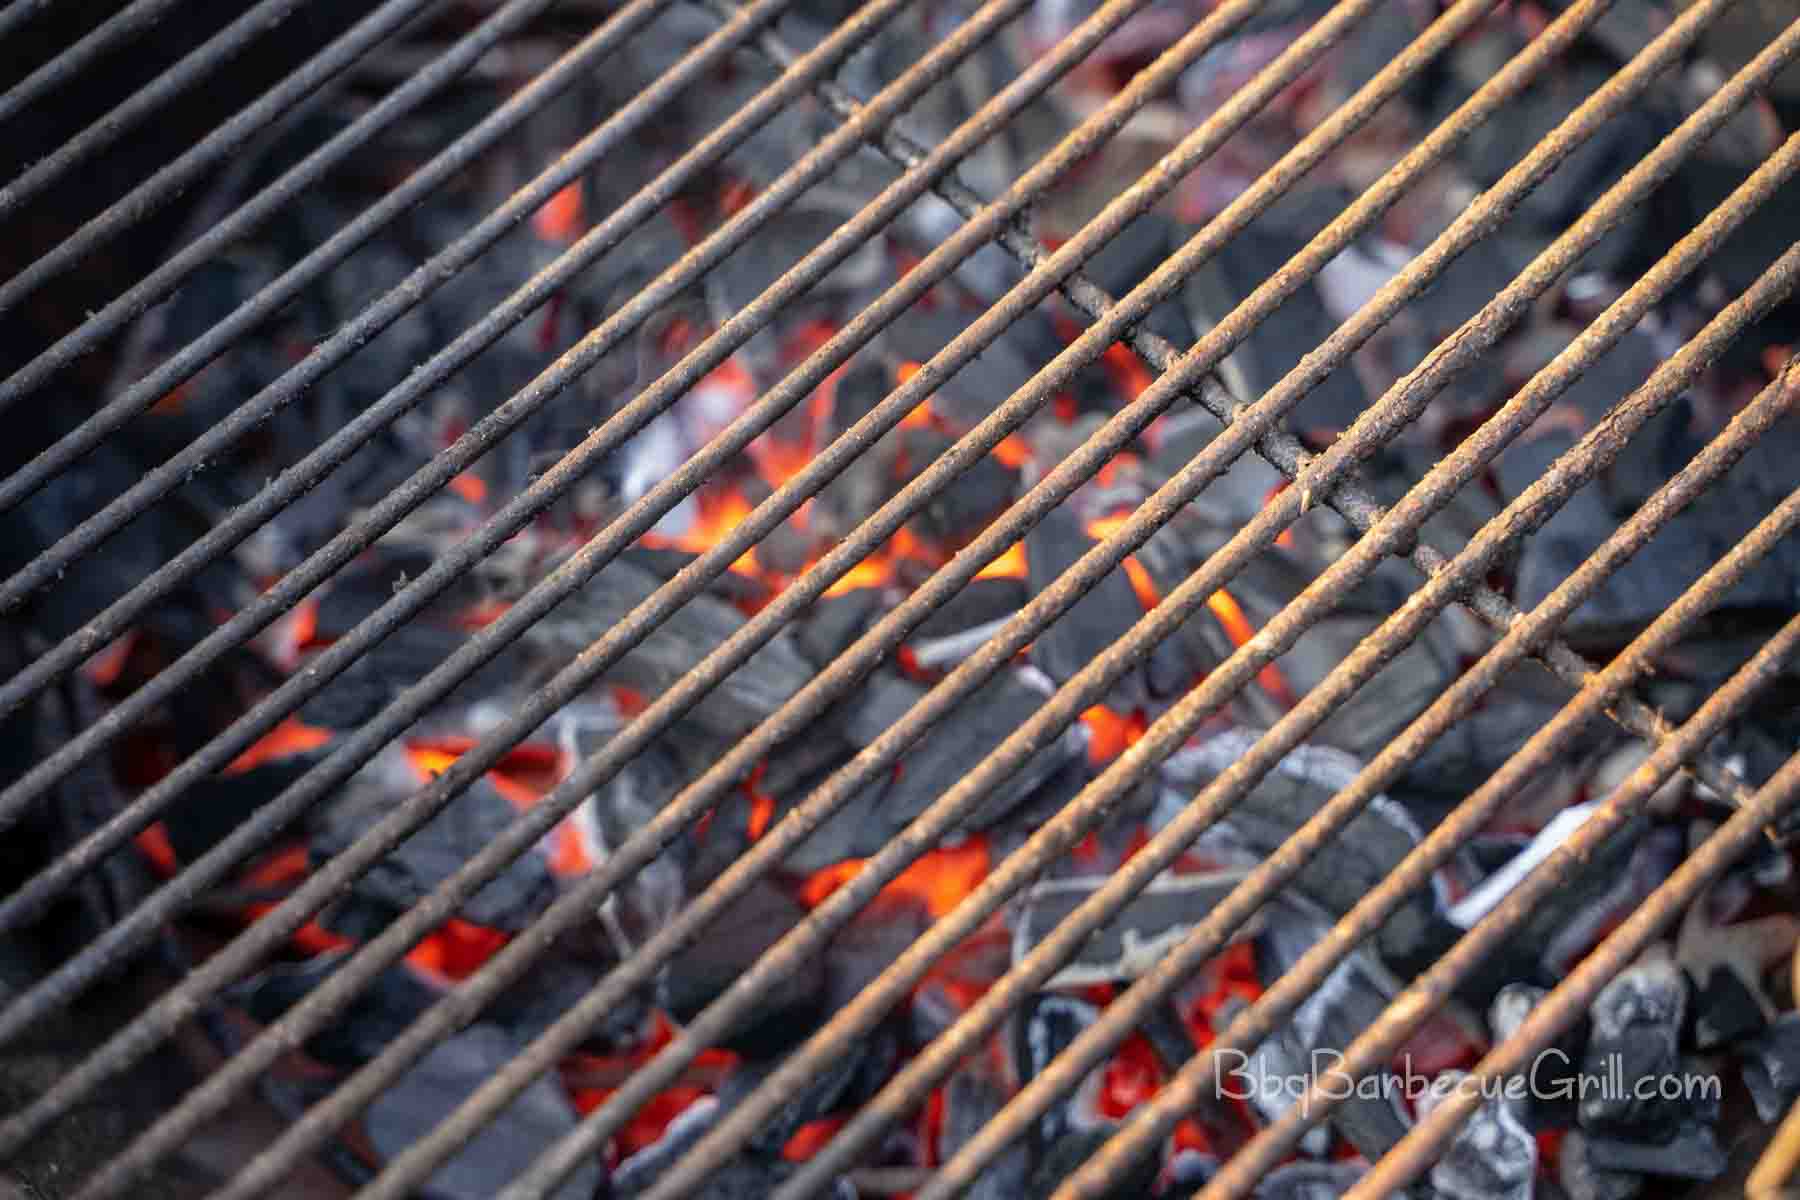 Rust on weber grill grates